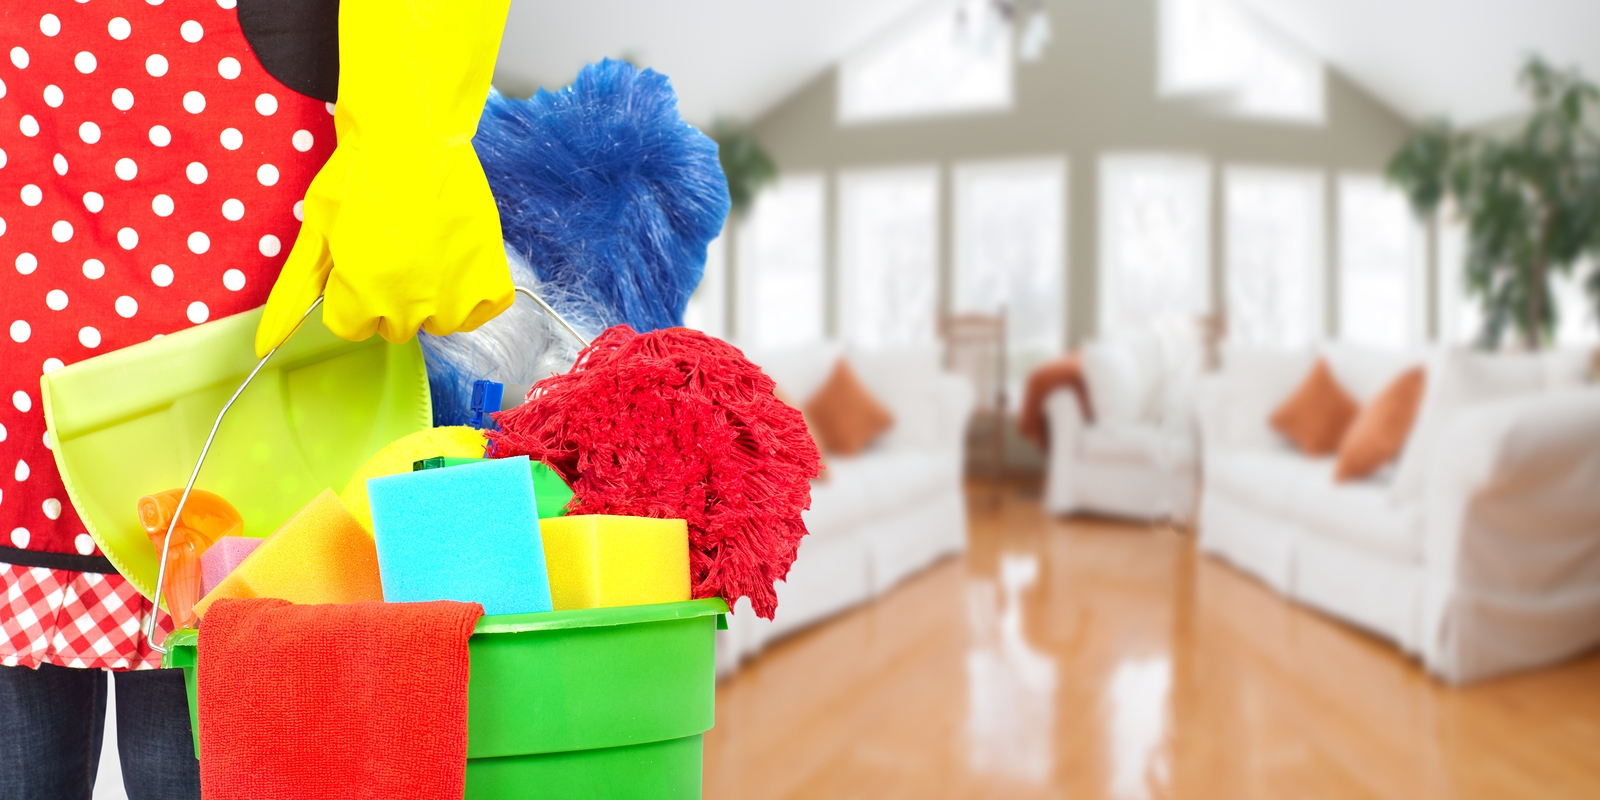 Professional Cleaning Services - End Summer with a Clean Sweep